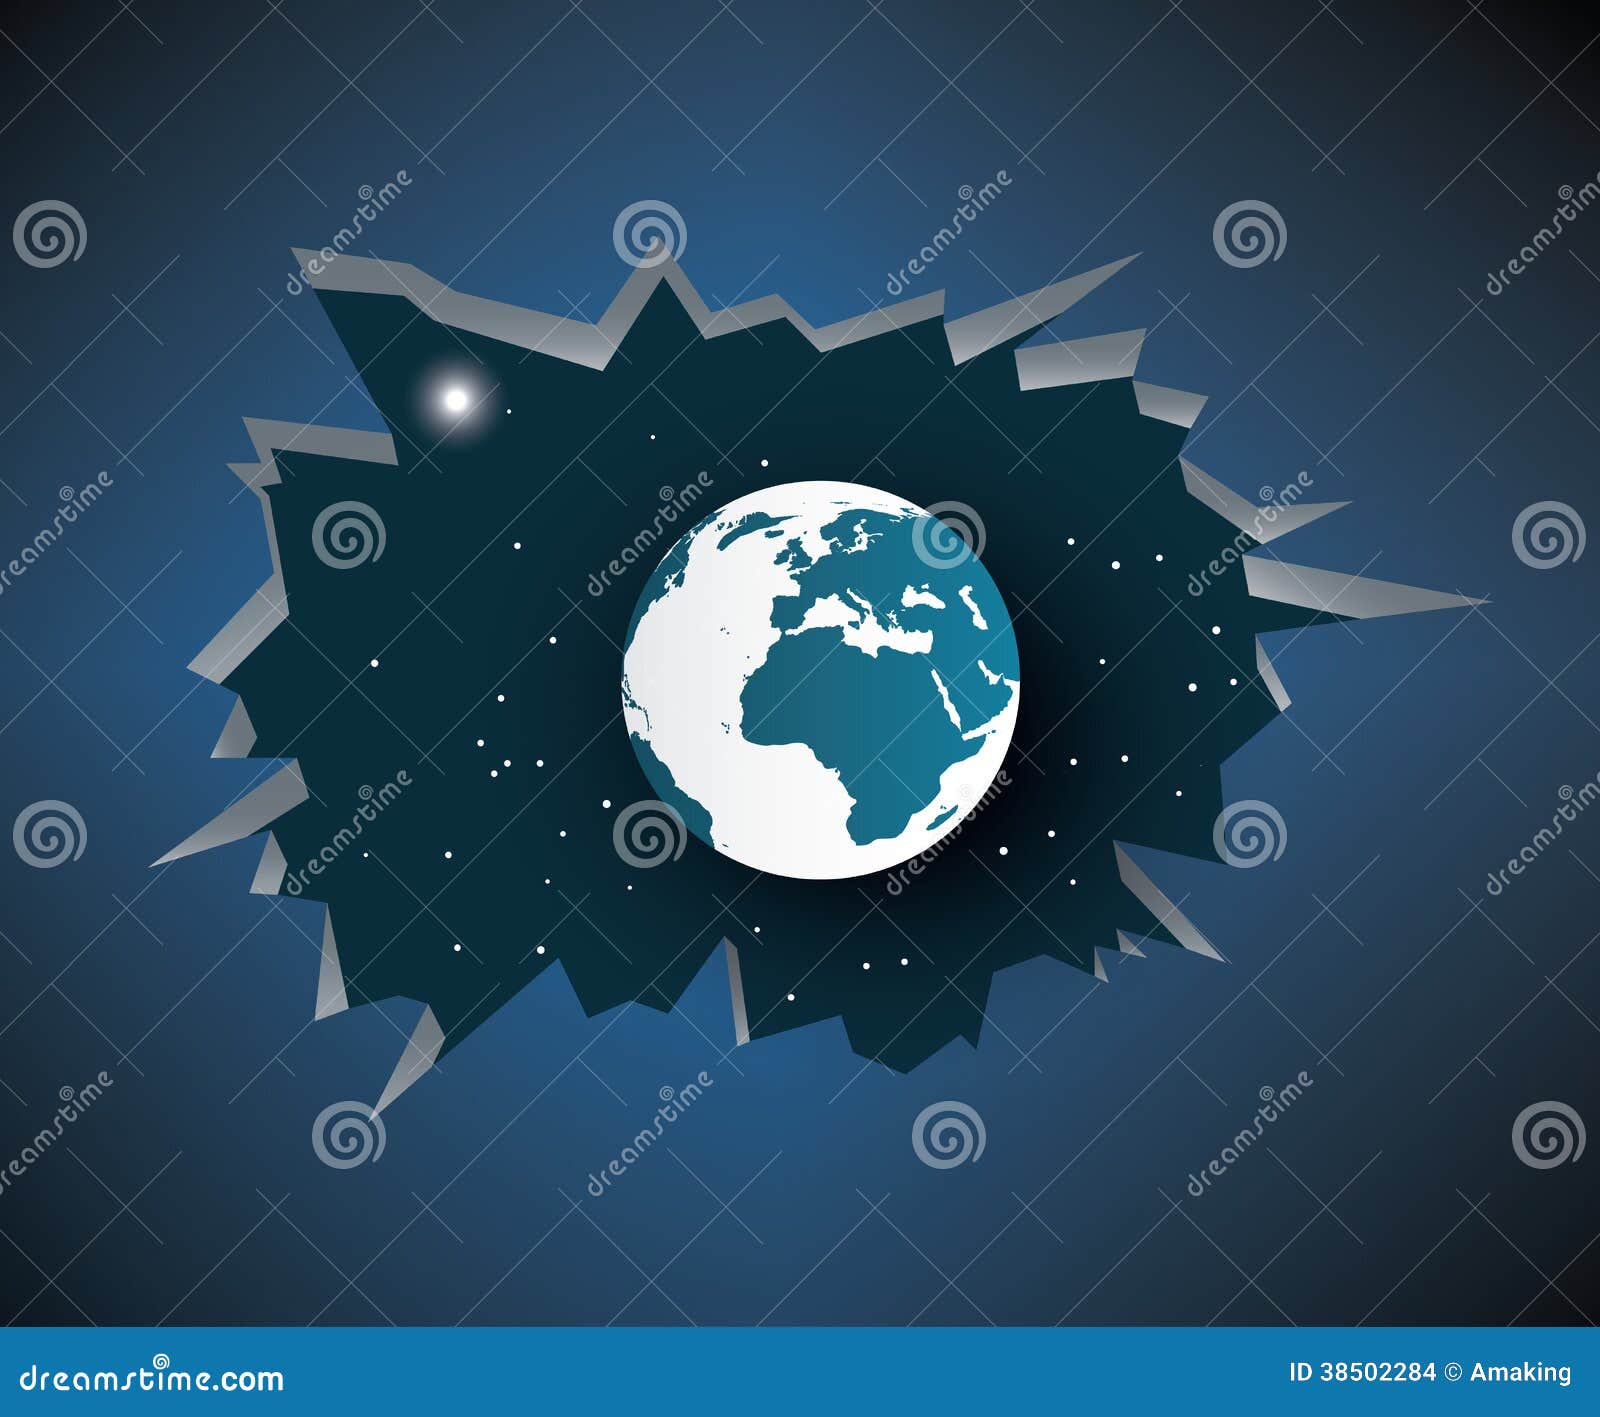 Cracked earth abstract background, illustration